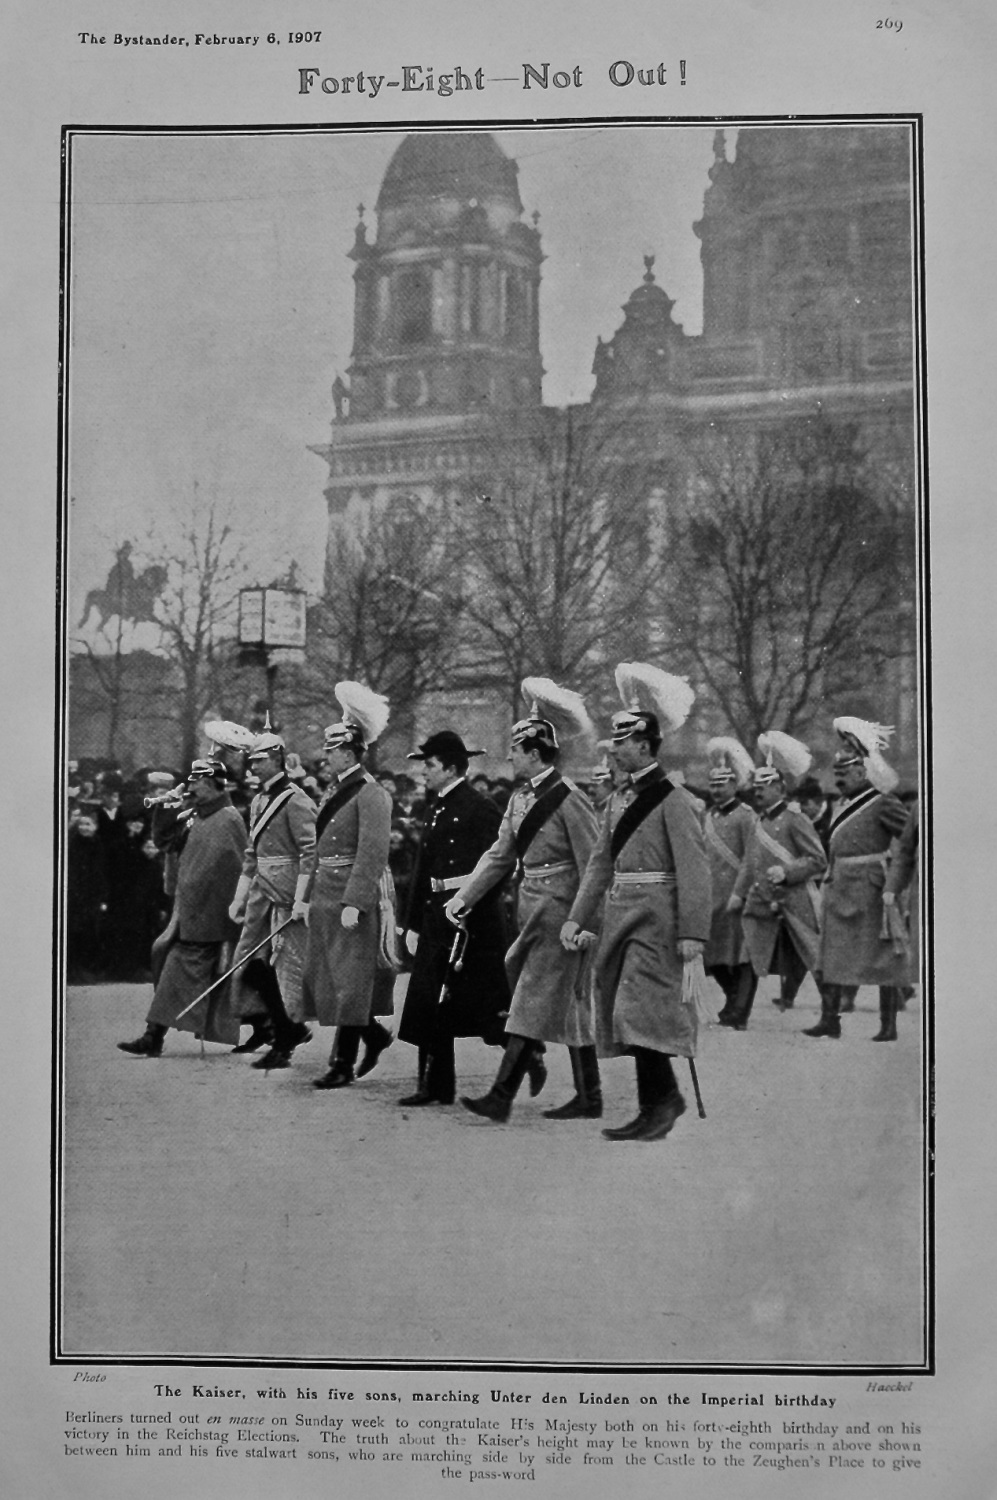 Forty-Eight - Not Out !. The Kaiser, with his five sons, marching Unter den